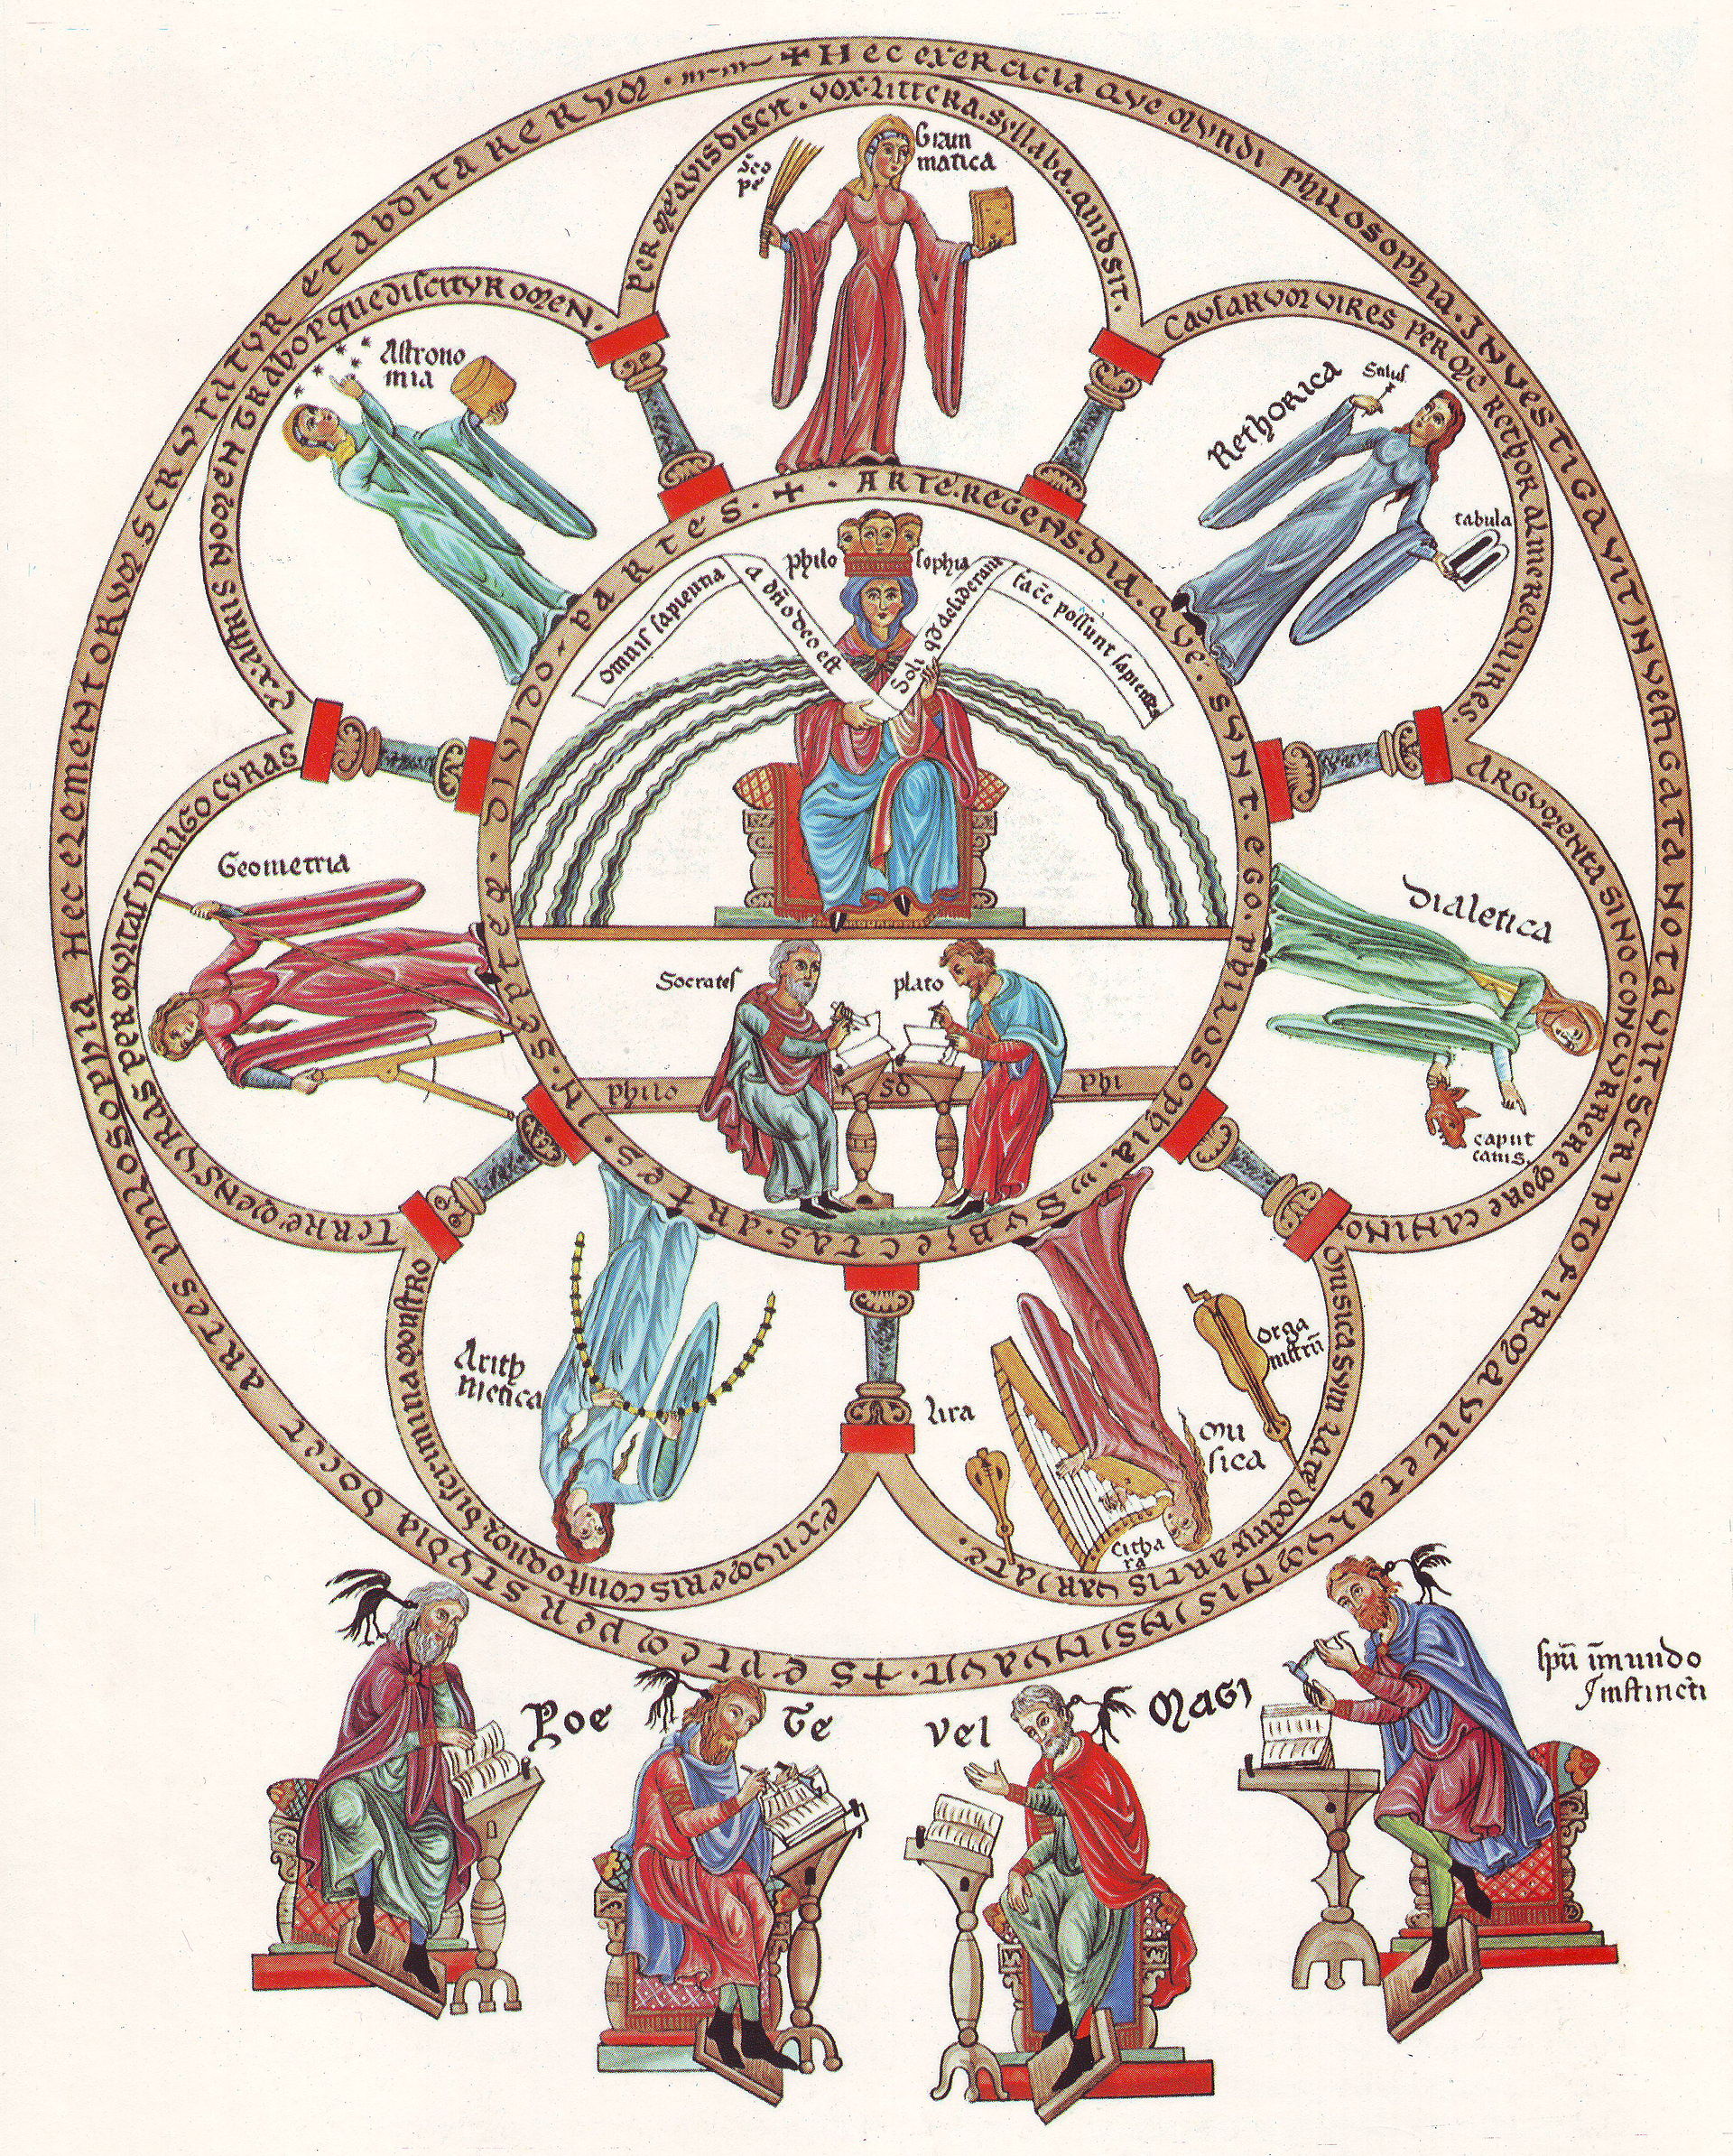 Philosophia and the seven liberal arts – from the Hortus deliciarum of Herrad of Landsberg (12th century)